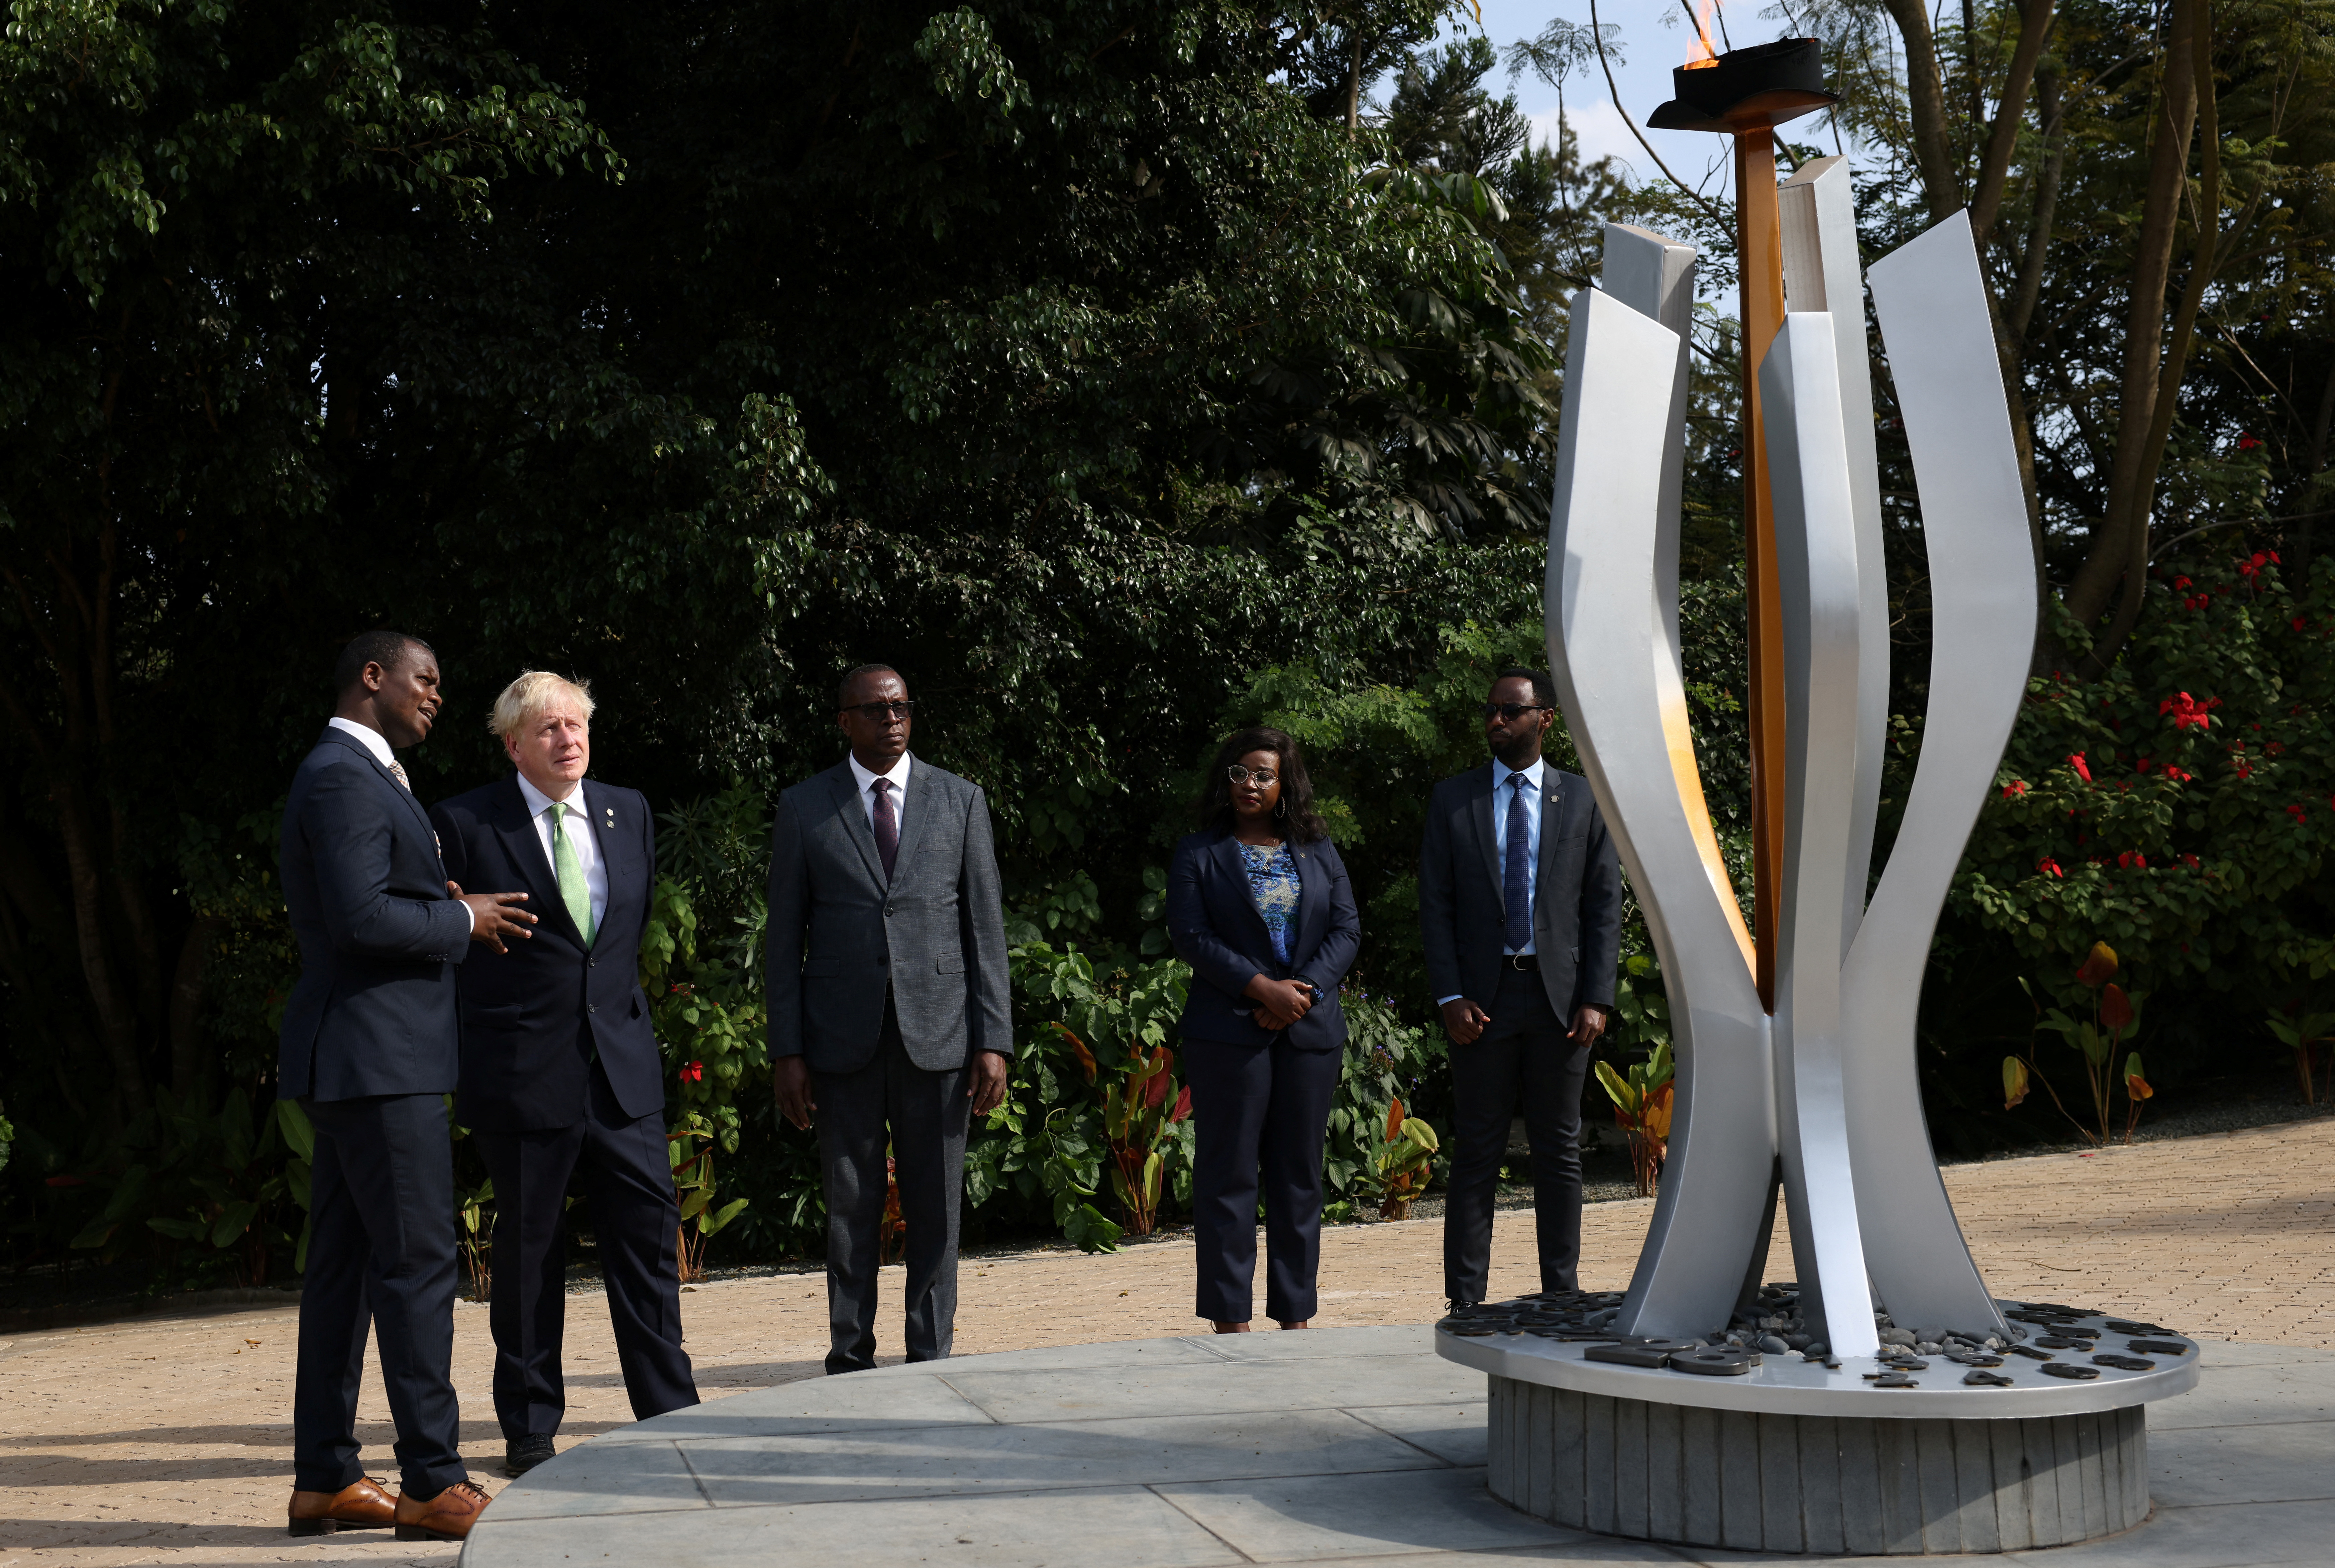 Britain's PM Attends Day Four Of The 2022 Commonwealth Heads of Government Meeting